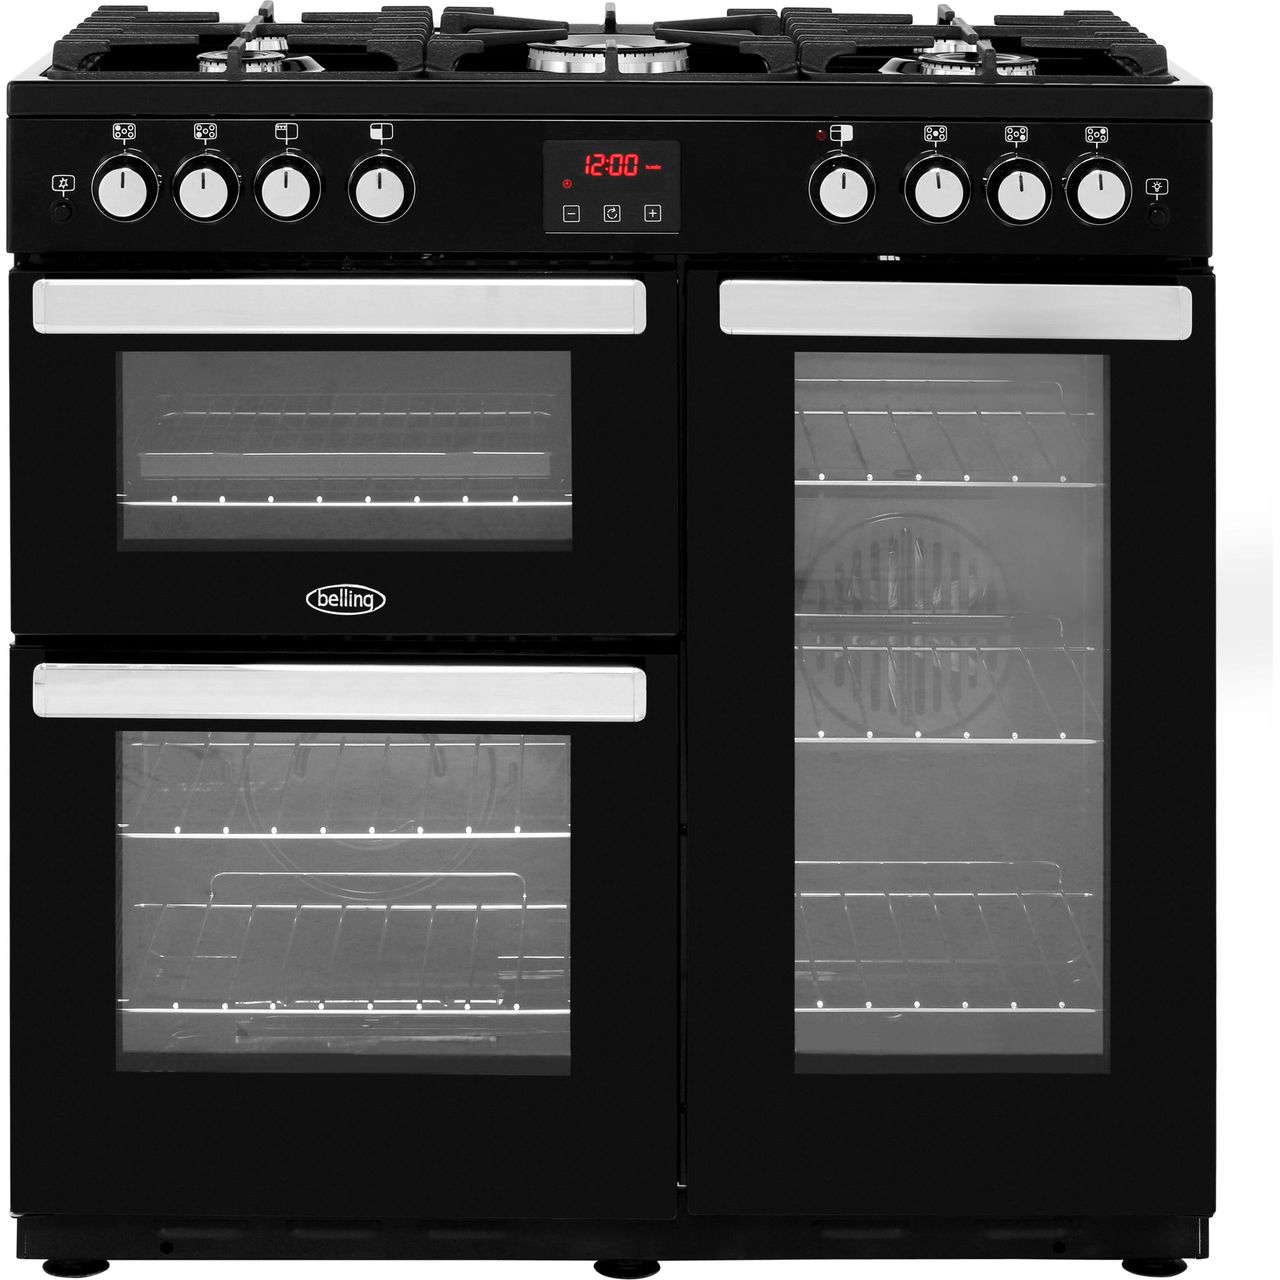 Belling CookcentreX90G 90cm Gas Range Cooker with Electric Fan Oven - Black - A/A Rated, Black